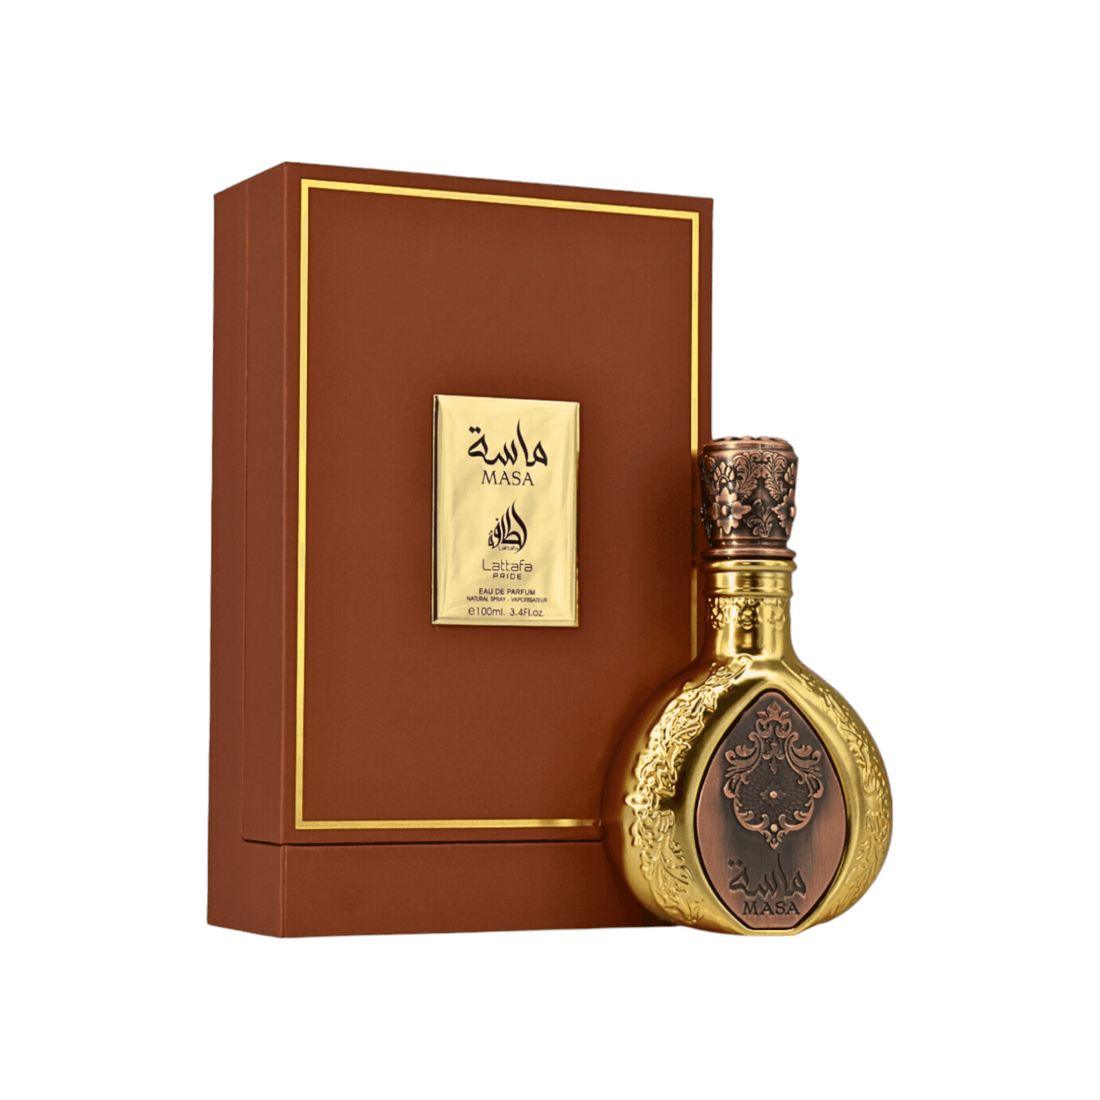 Luxurious 100ml bottle of Masa Perfume by Lattafa Pride, encapsulating its blend of sophisticated and exotic notes.